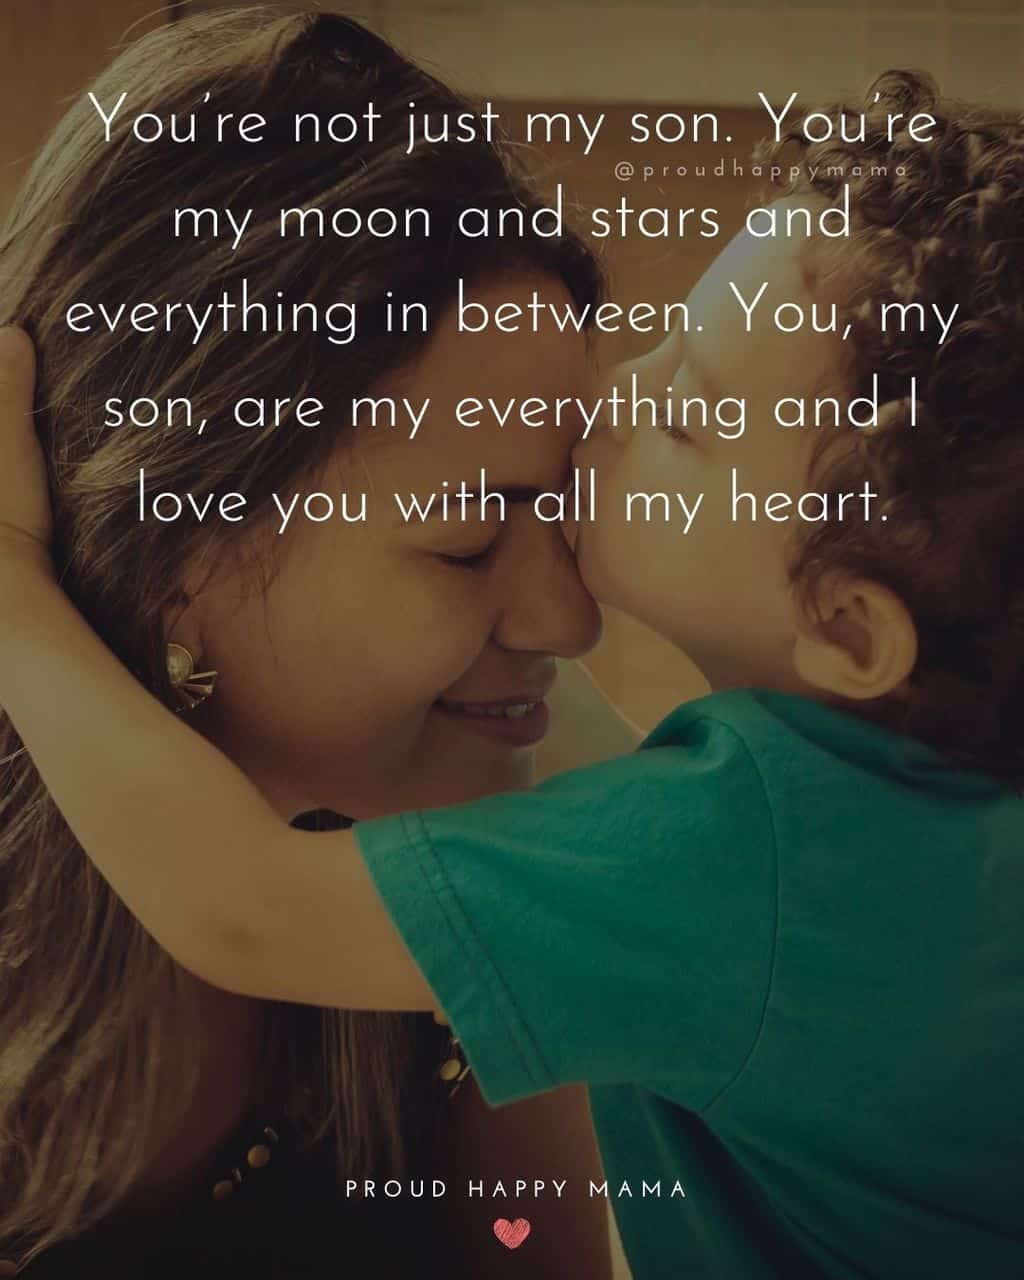 Son Quotes - You’re not just my son. You’re my moon and stars and everything in between. You, my son, are my everything and I